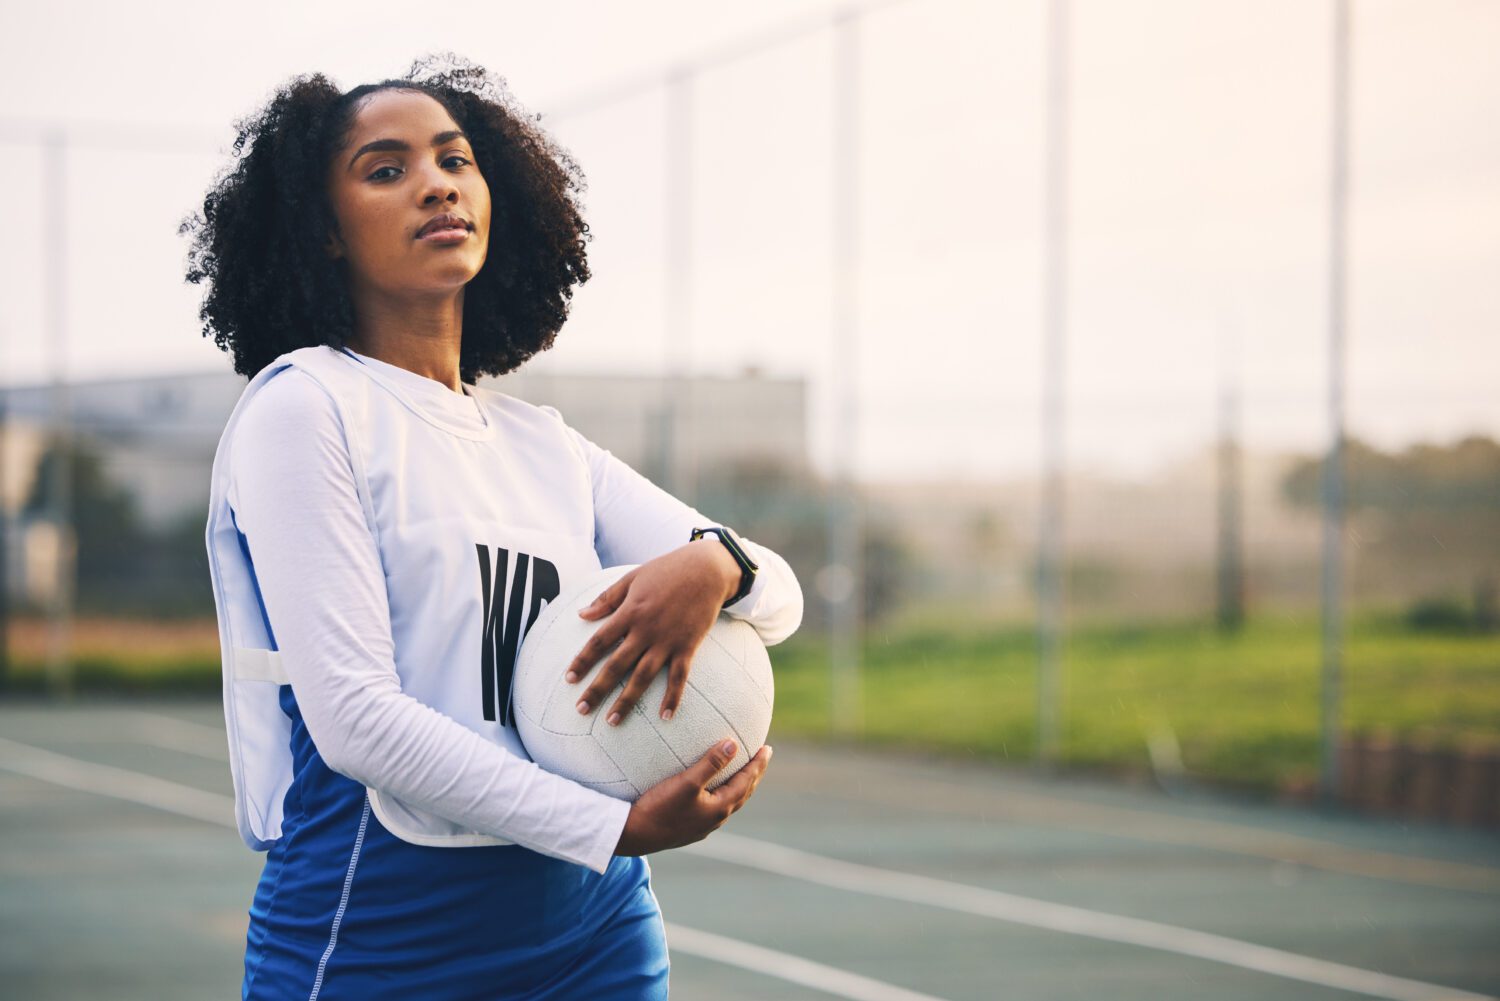 Sports, netball and portrait of female with a ball after match, exercise or training on the court. Confidence, fitness and serious black woman athlete standing on field for game, workout or practice.